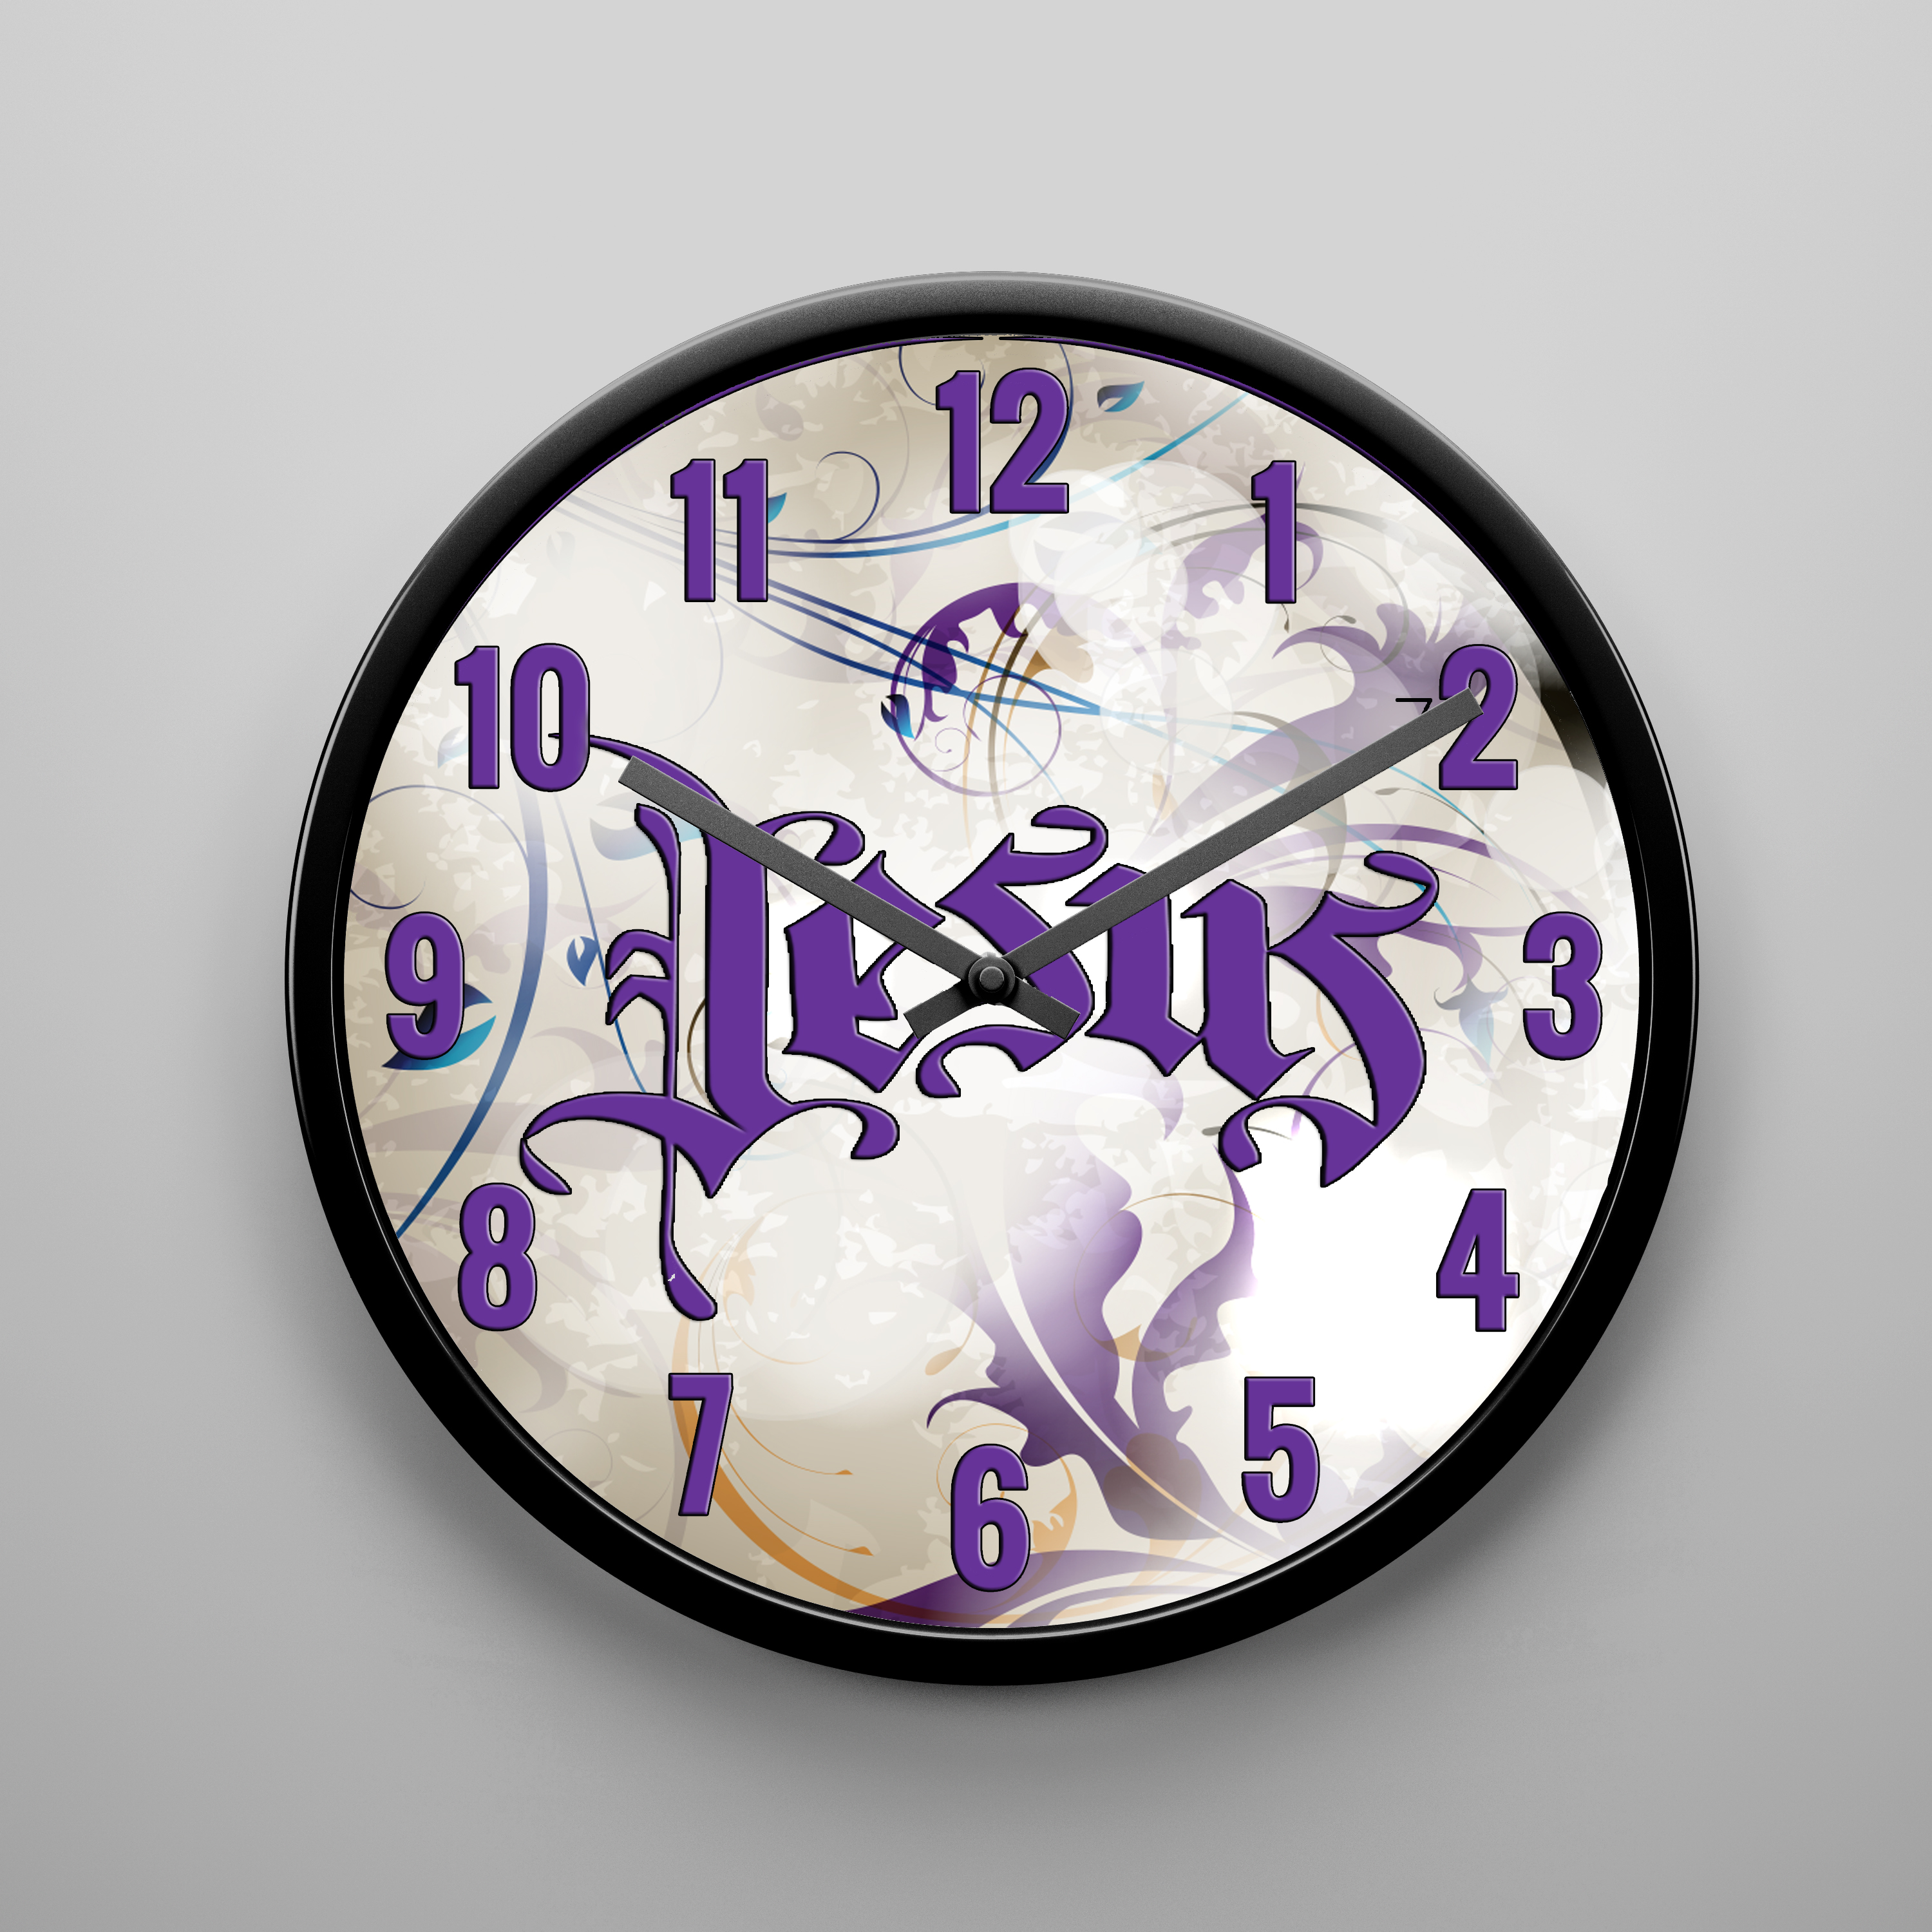 TvineCreations Clock made with sublimation printing